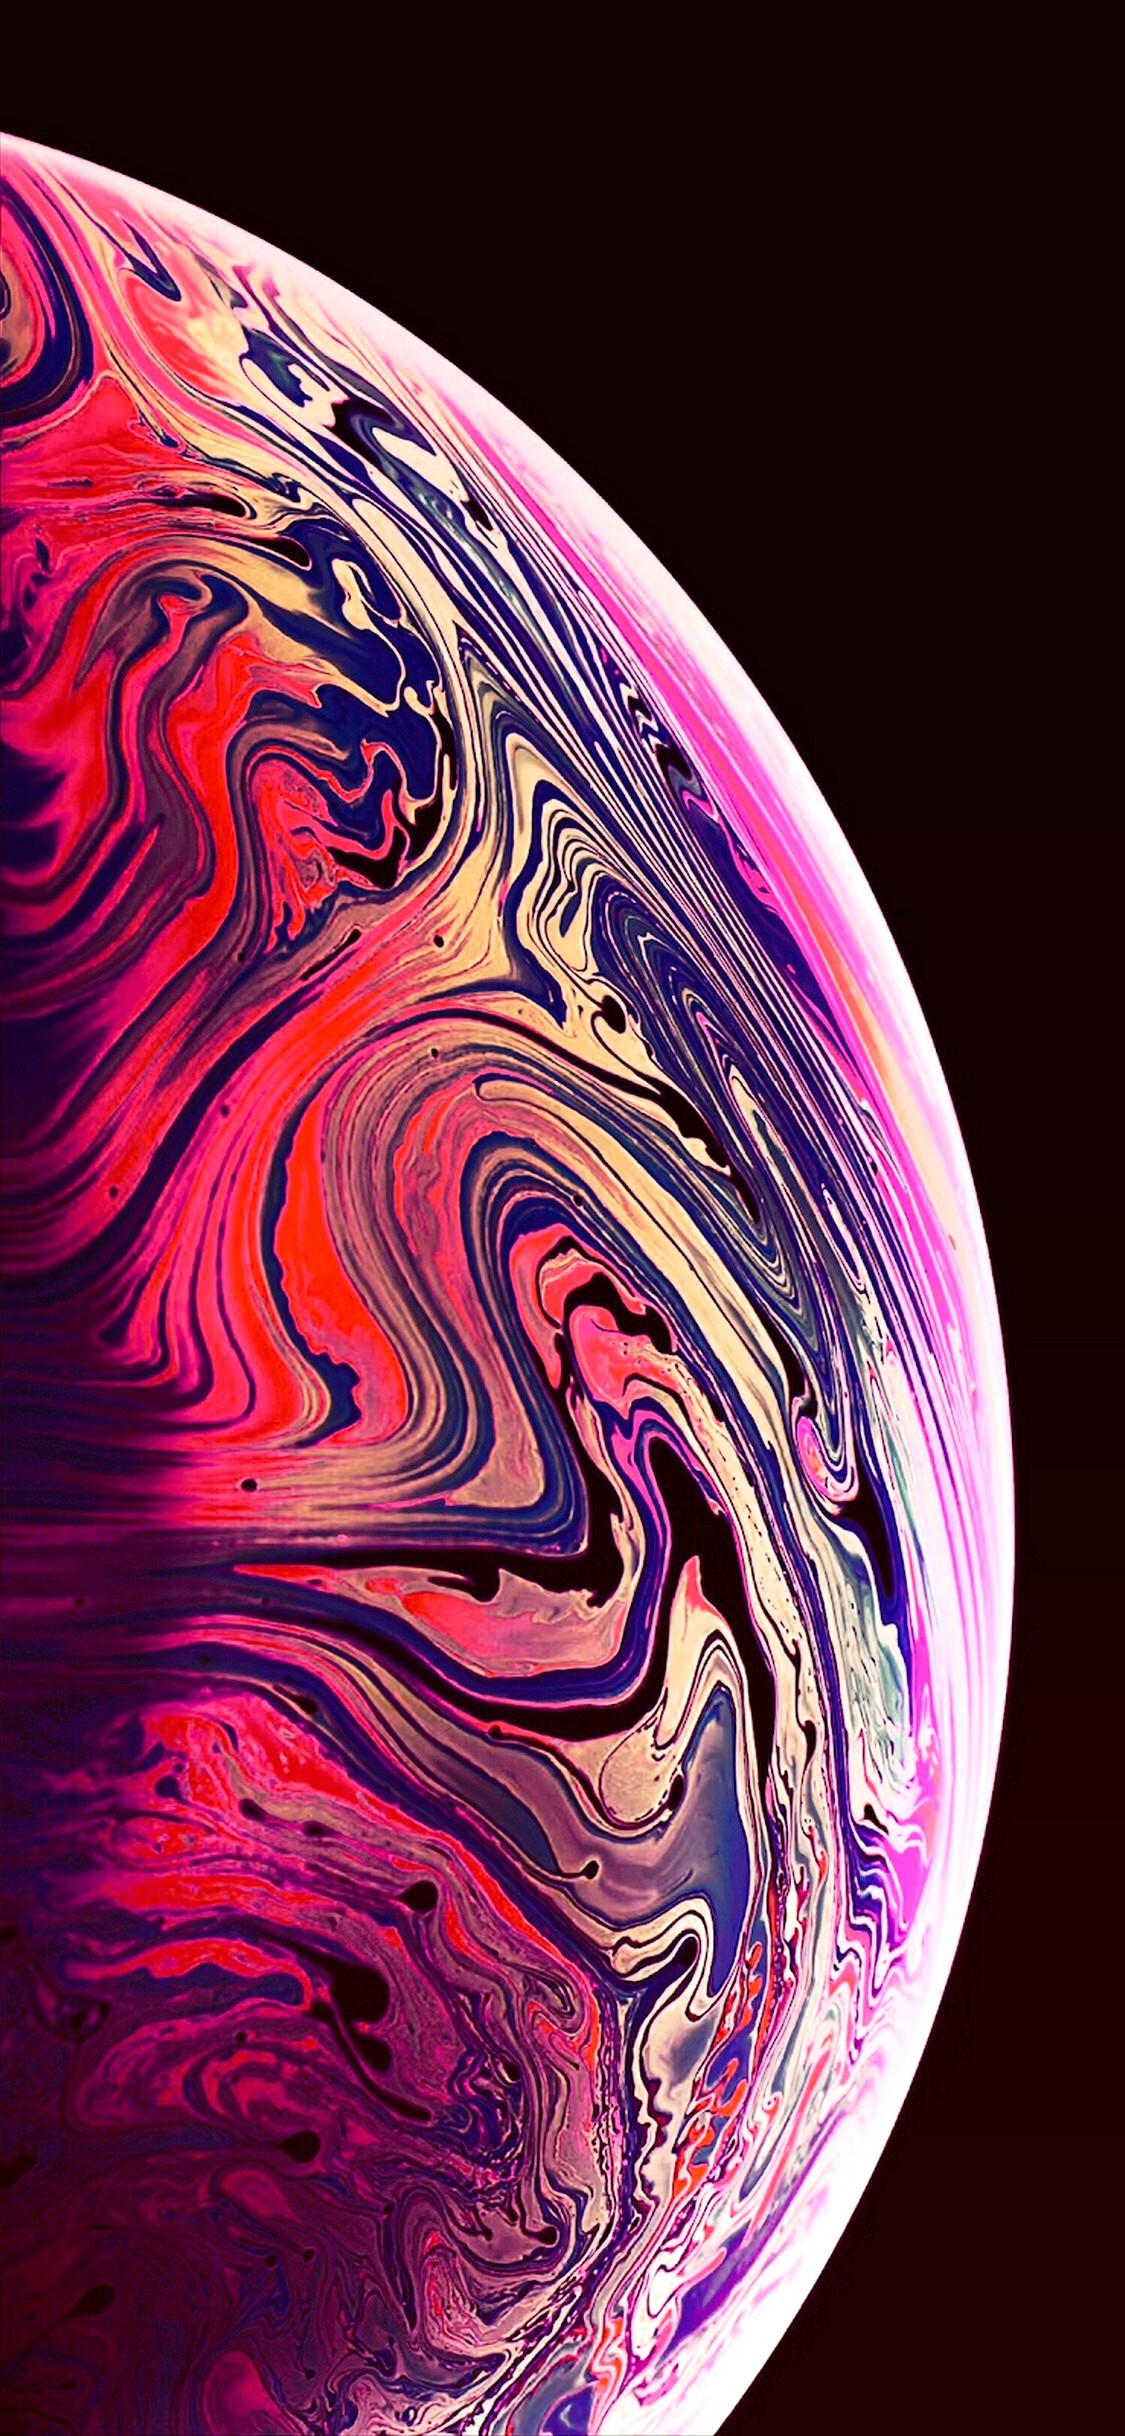 Iphone Xs Wallpaper Home Screen With High-resolution - Iphone Xs Live Wallpaper  Gif - 1125x2436 Wallpaper 